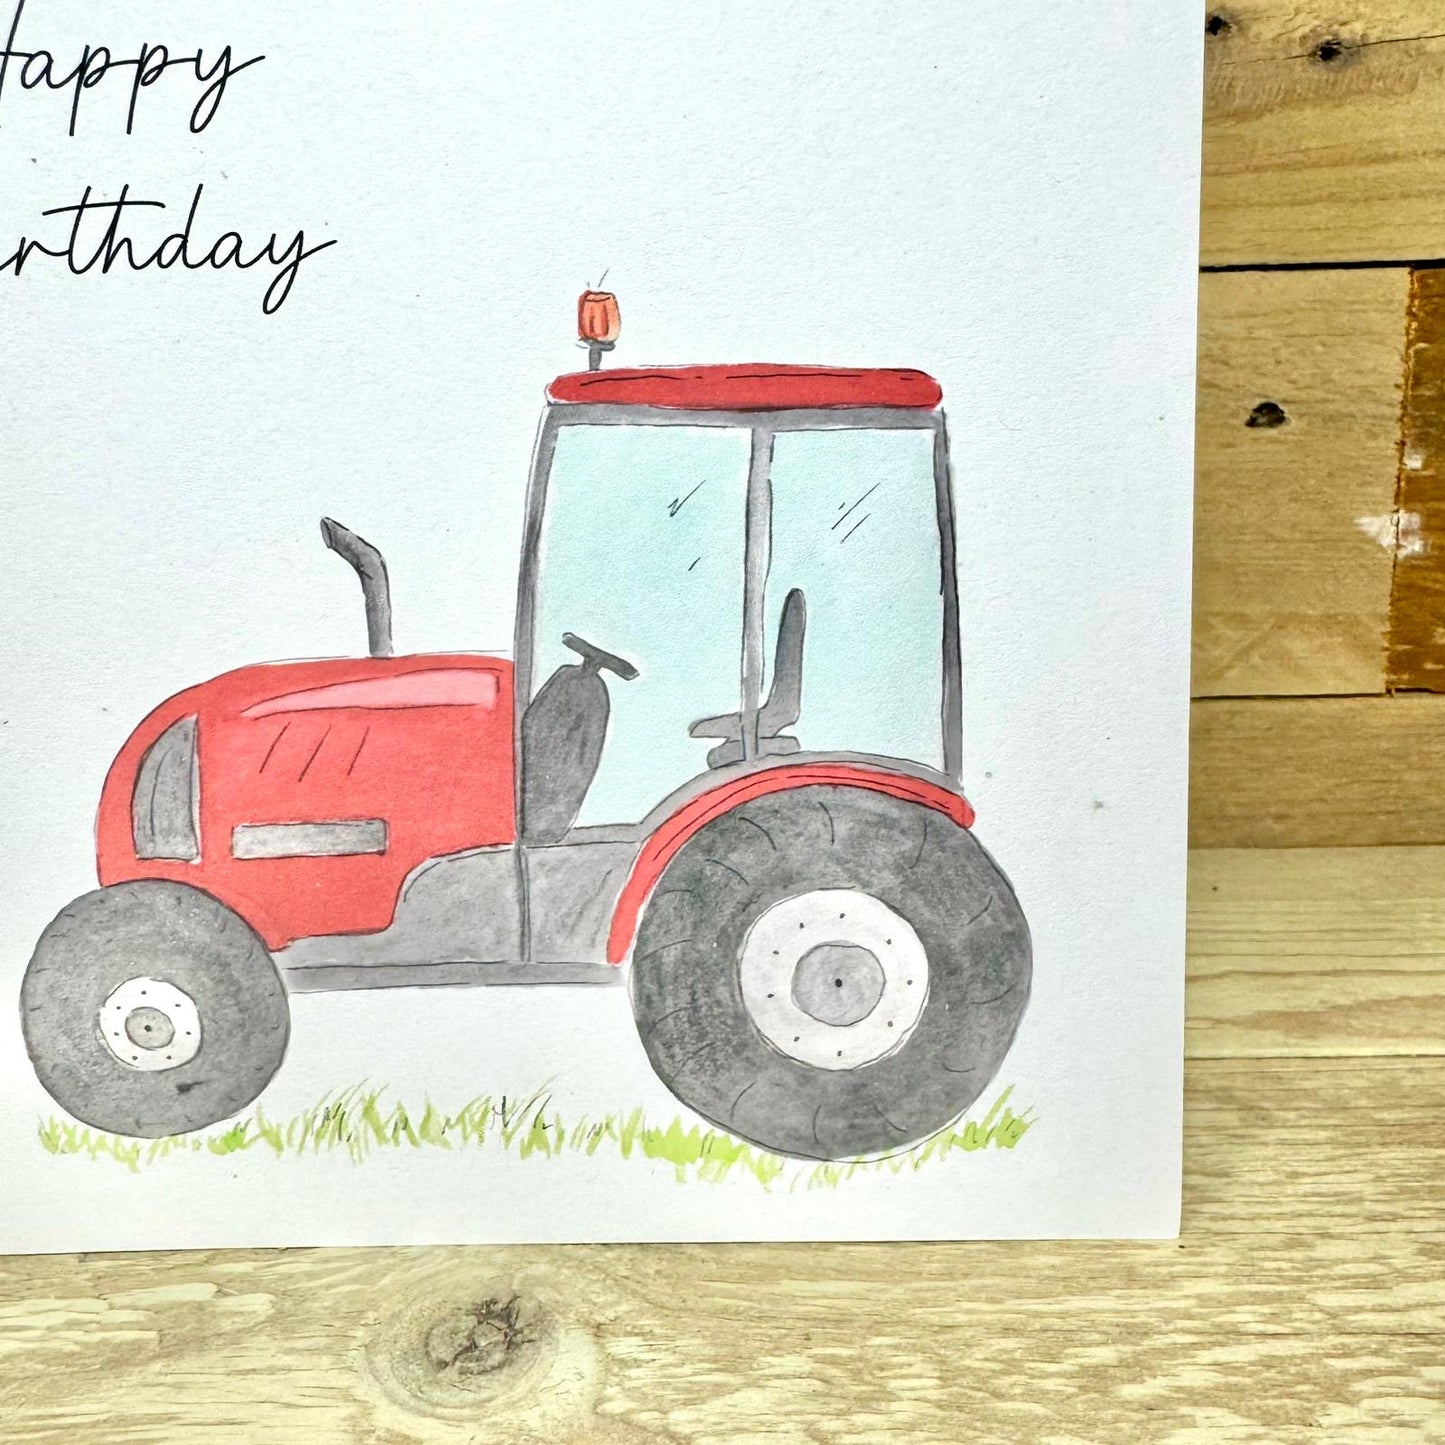 Tommy the Tractor Birthday Card